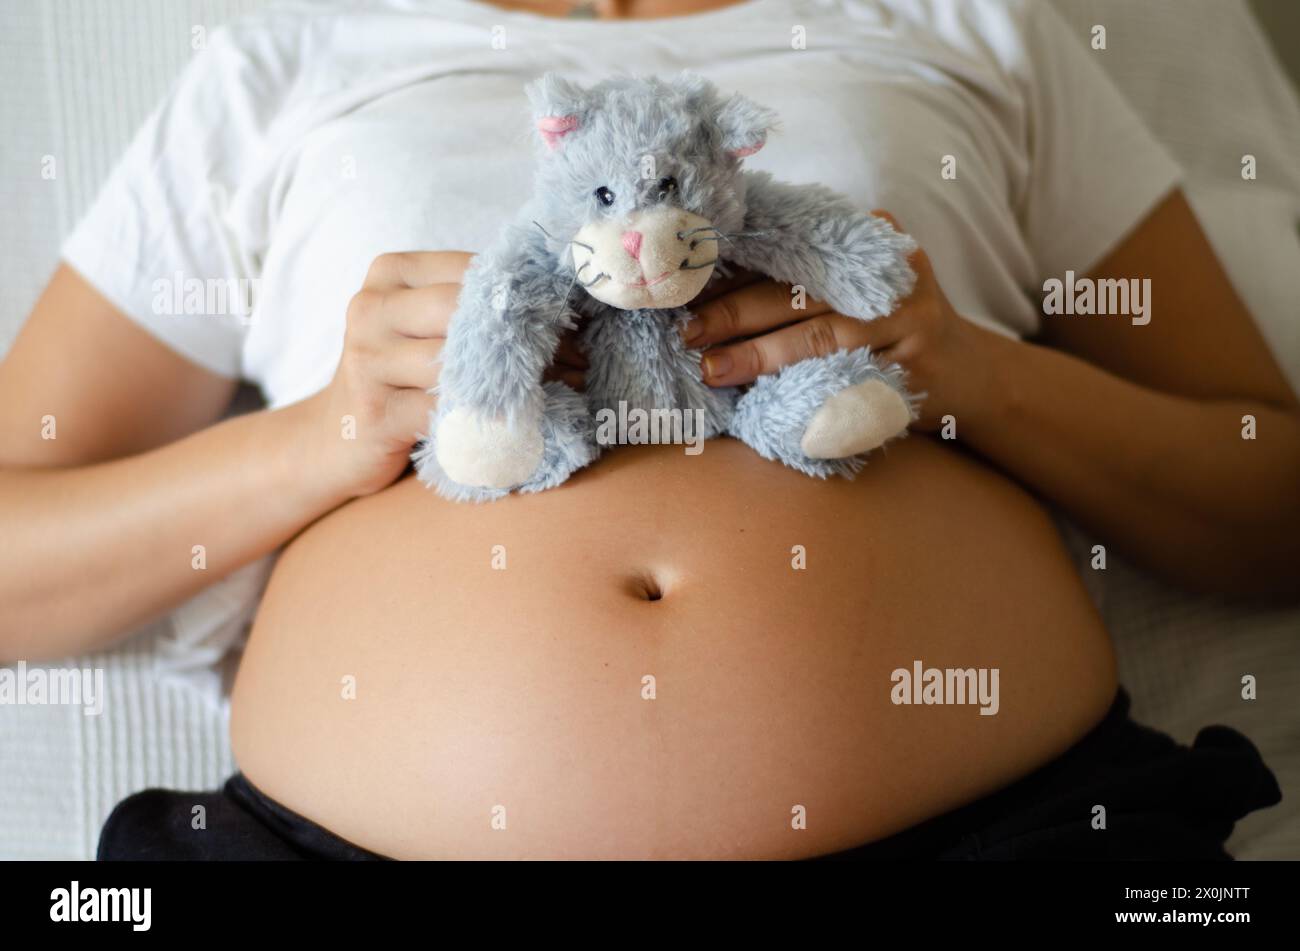 Pregnant woman holding a stuffed animal in her belly Stock Photo